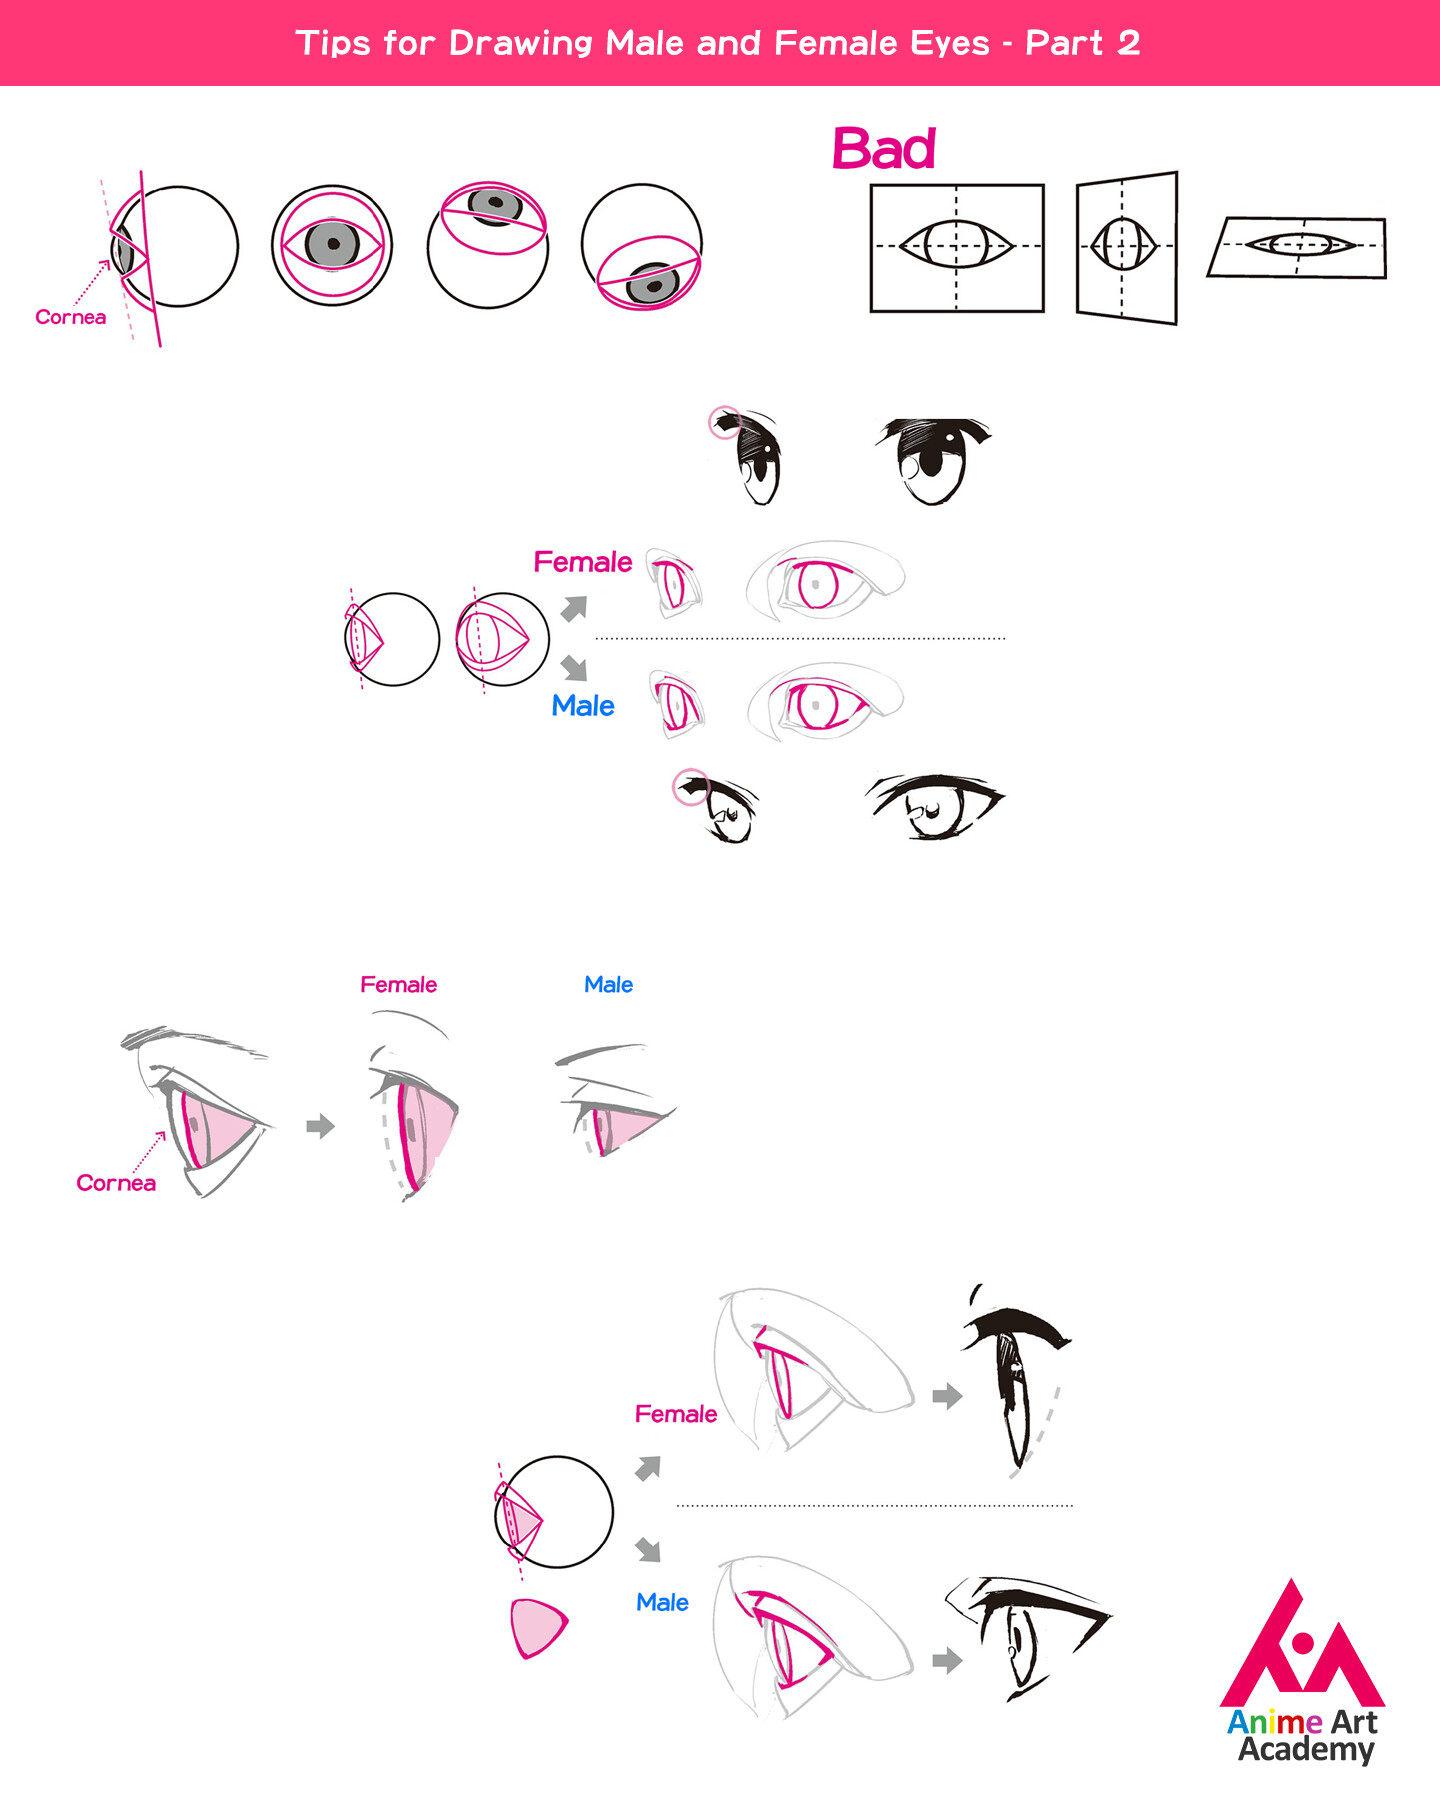 How to draw a Male anime eye.